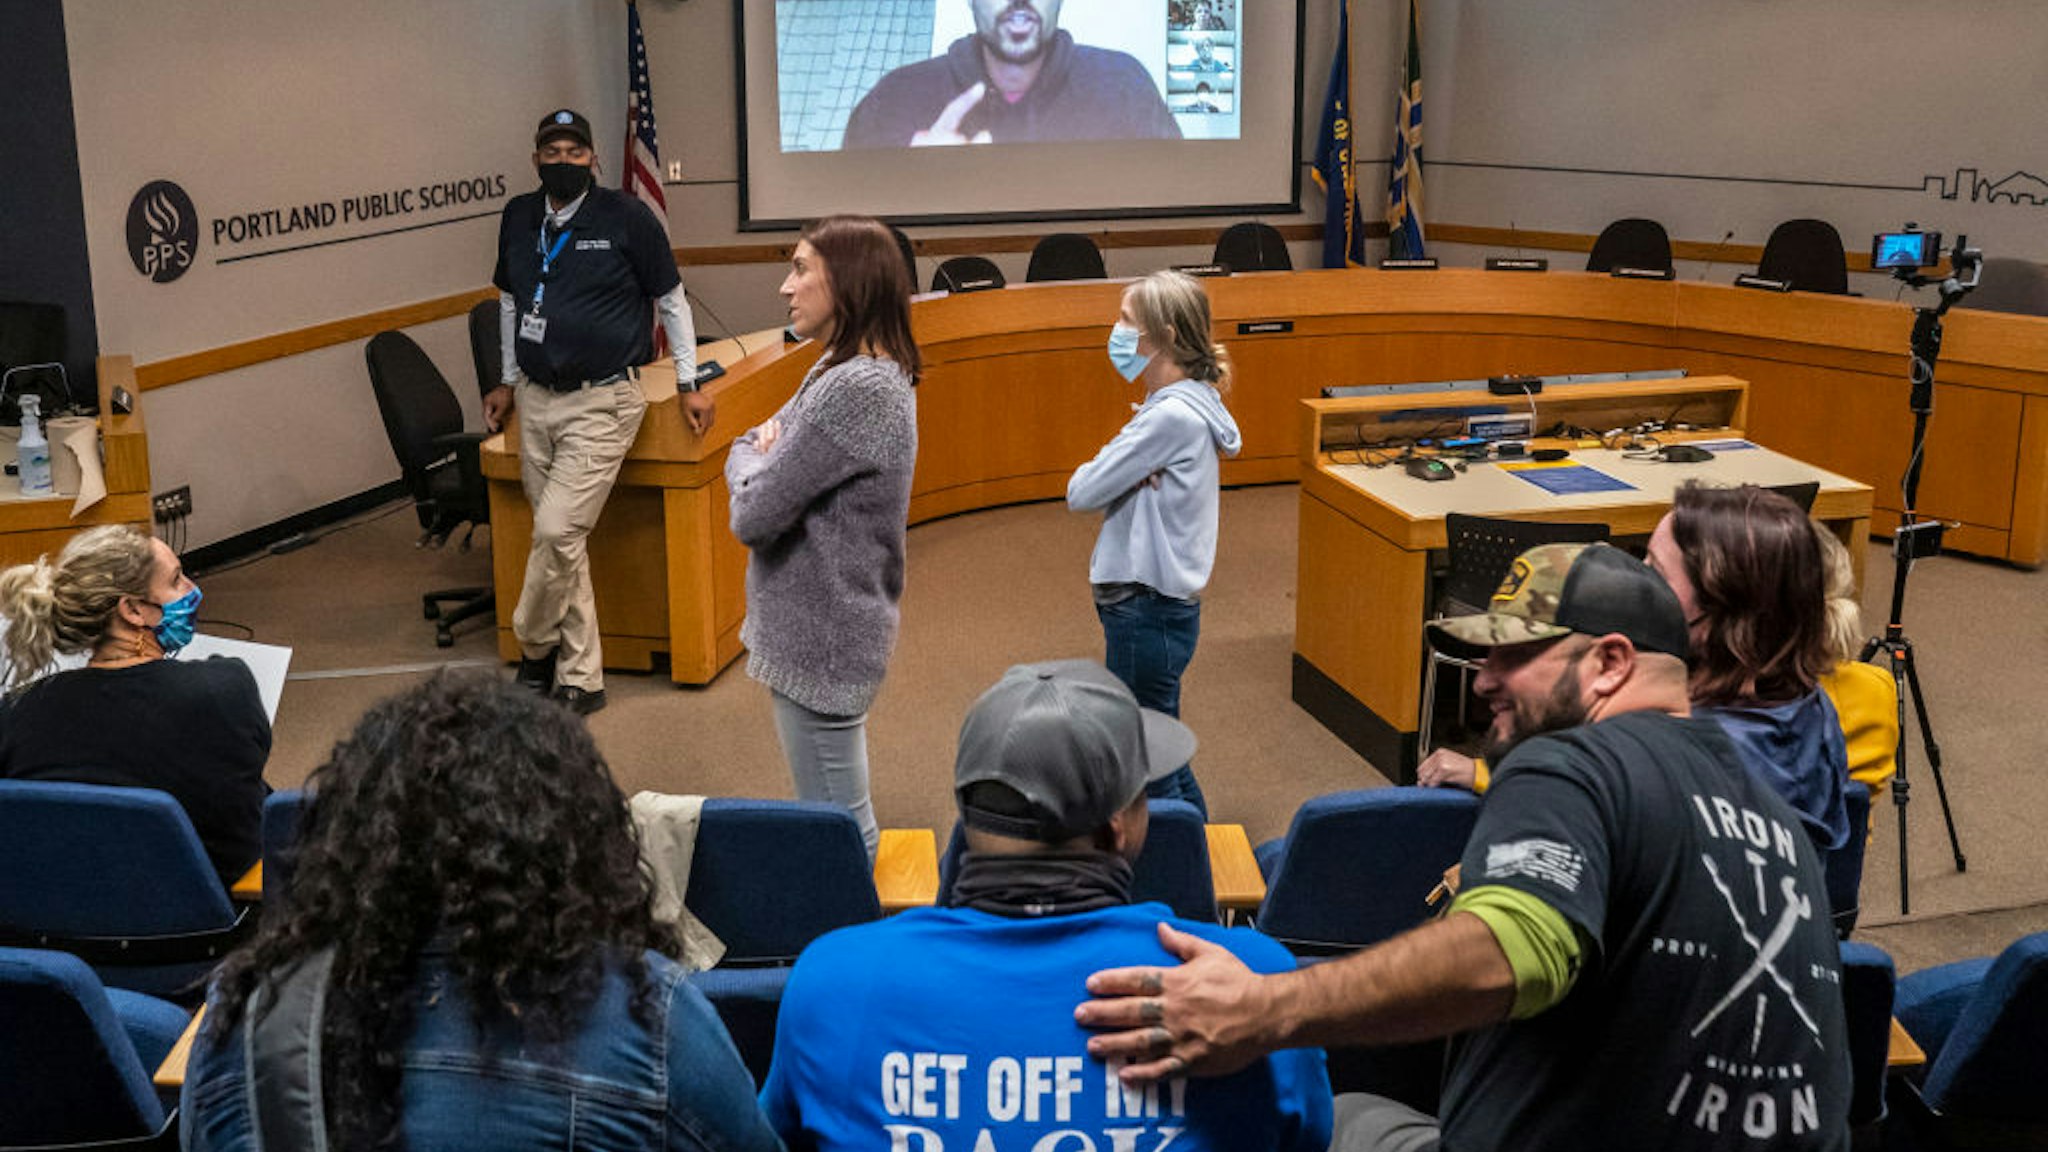 Anti-vaccine mandate protesters gather during a Portland Public Schools board meeting to discuss a proposed vaccine mandate for students on October 26, 2021 in Portland, Oregon.